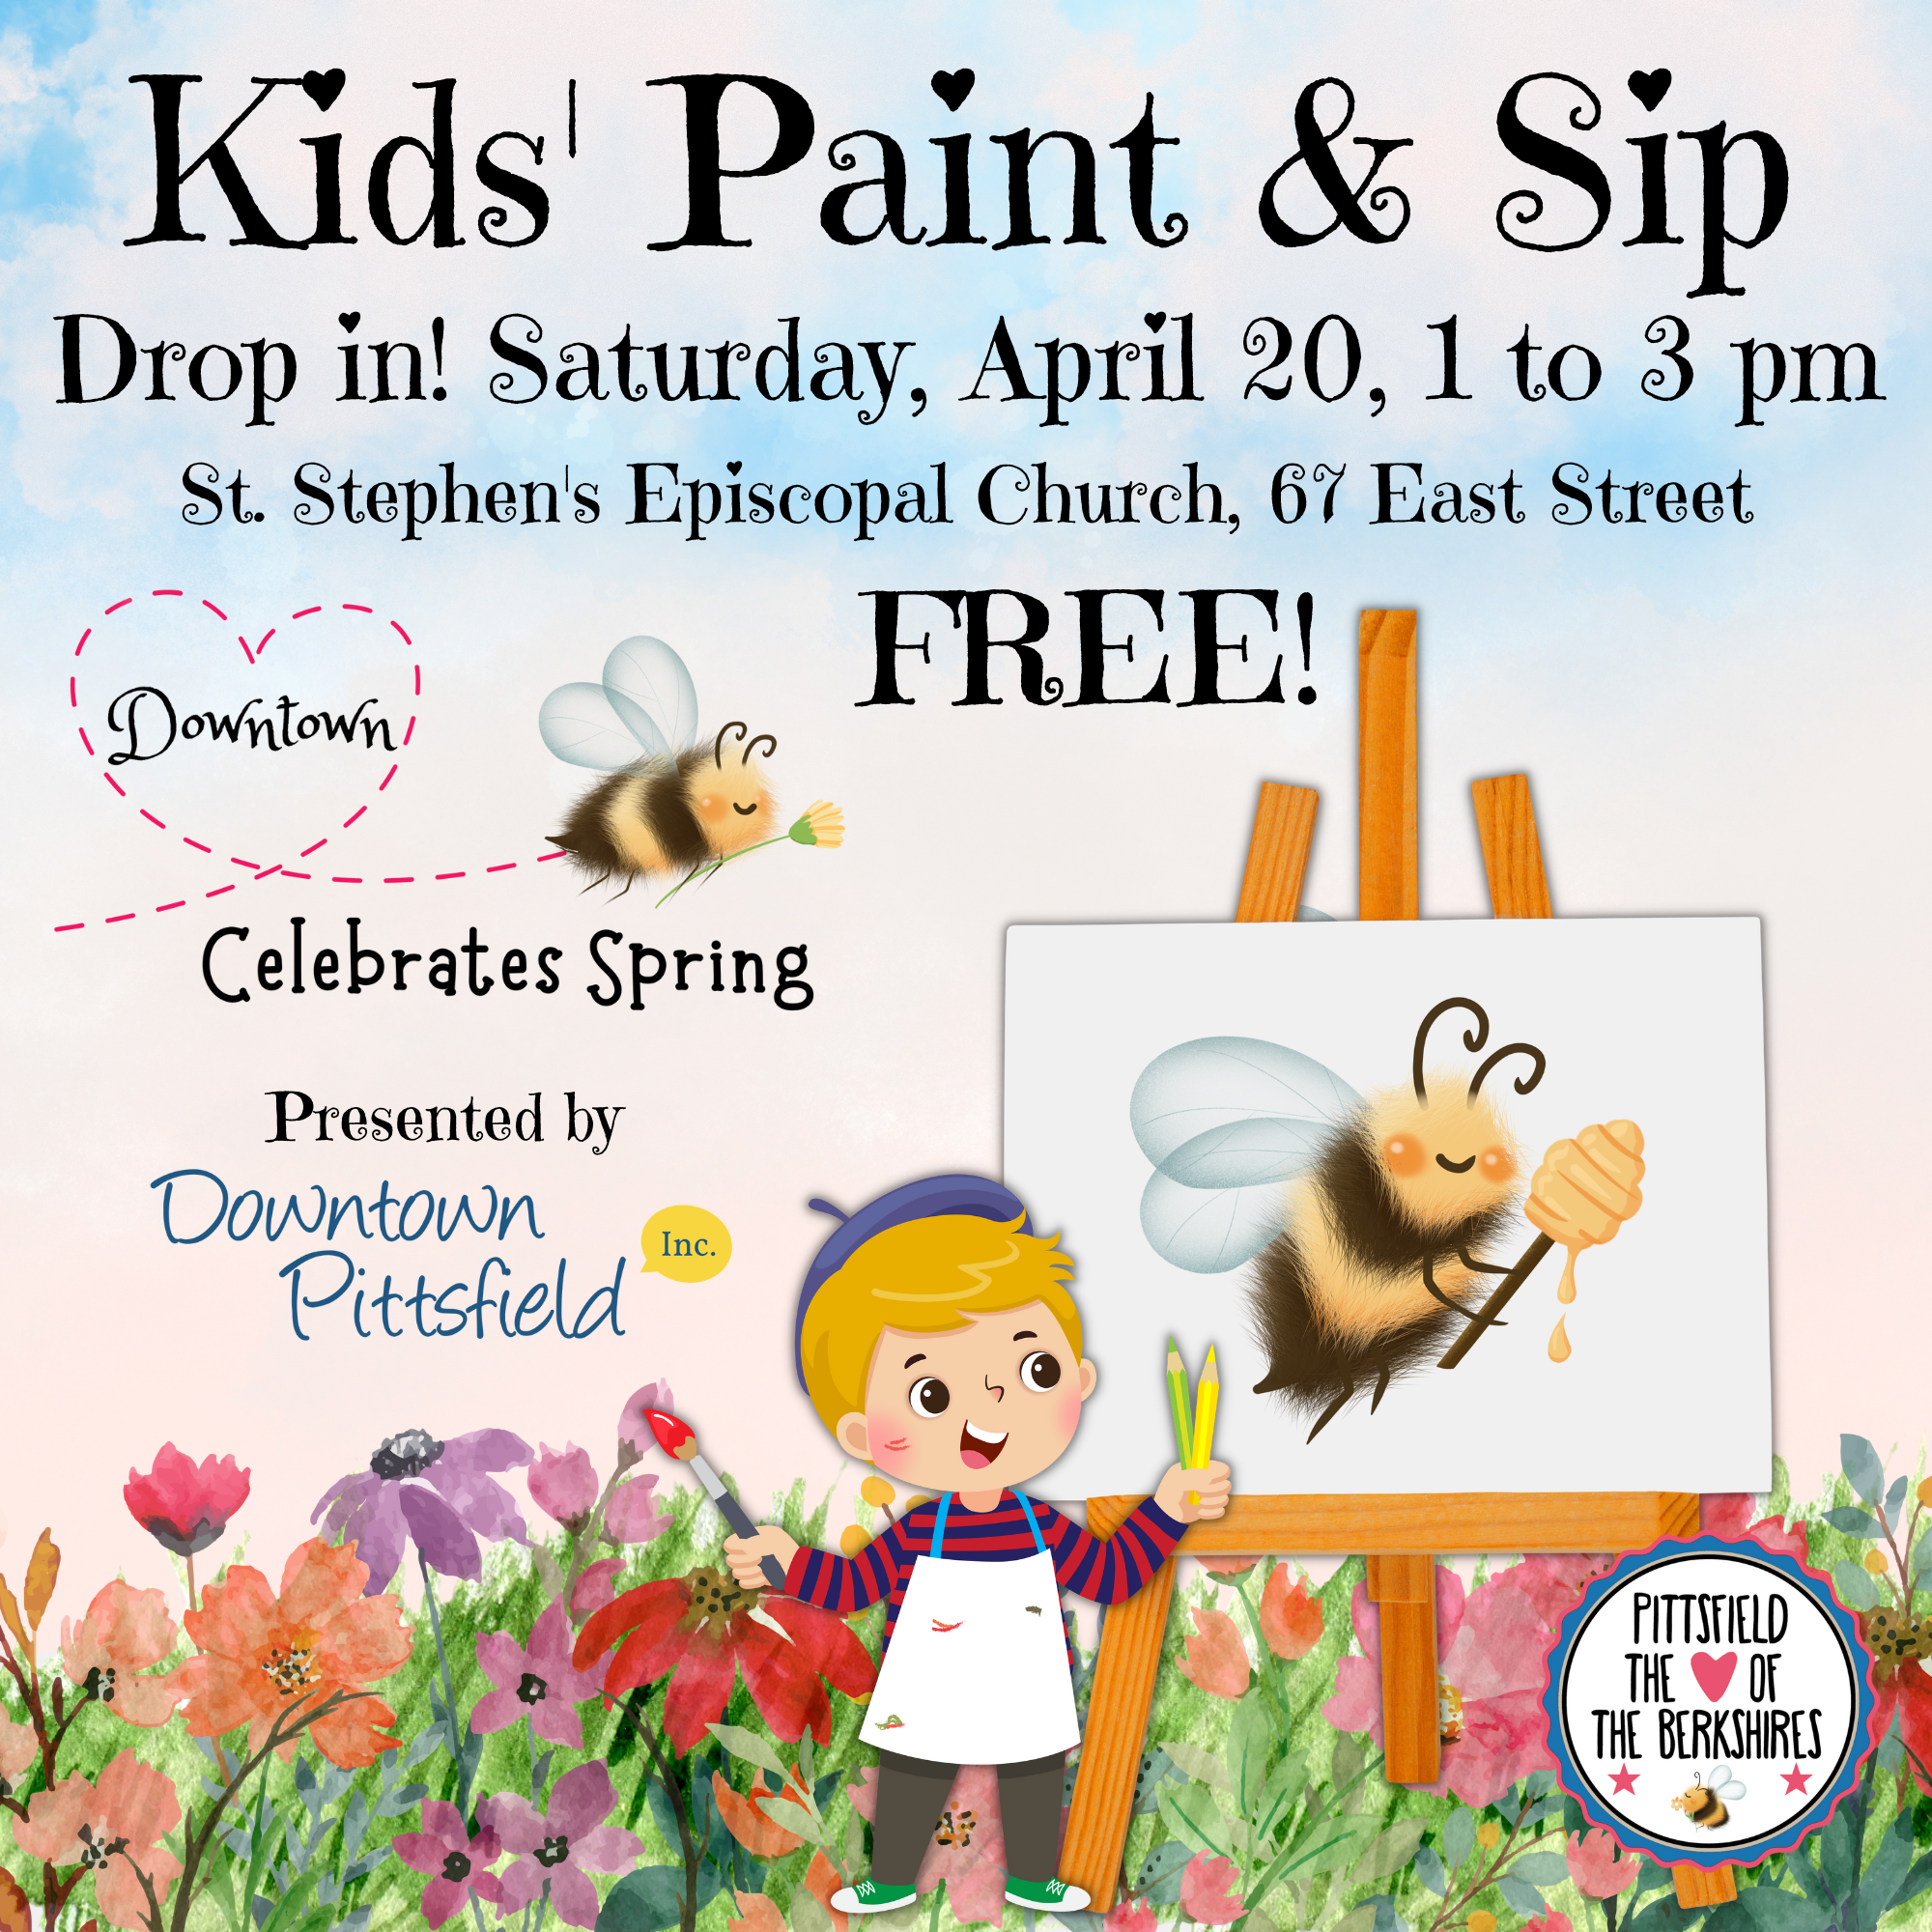 Free Kids’ Paint & Sip as part of Downtown Celebrates Spring